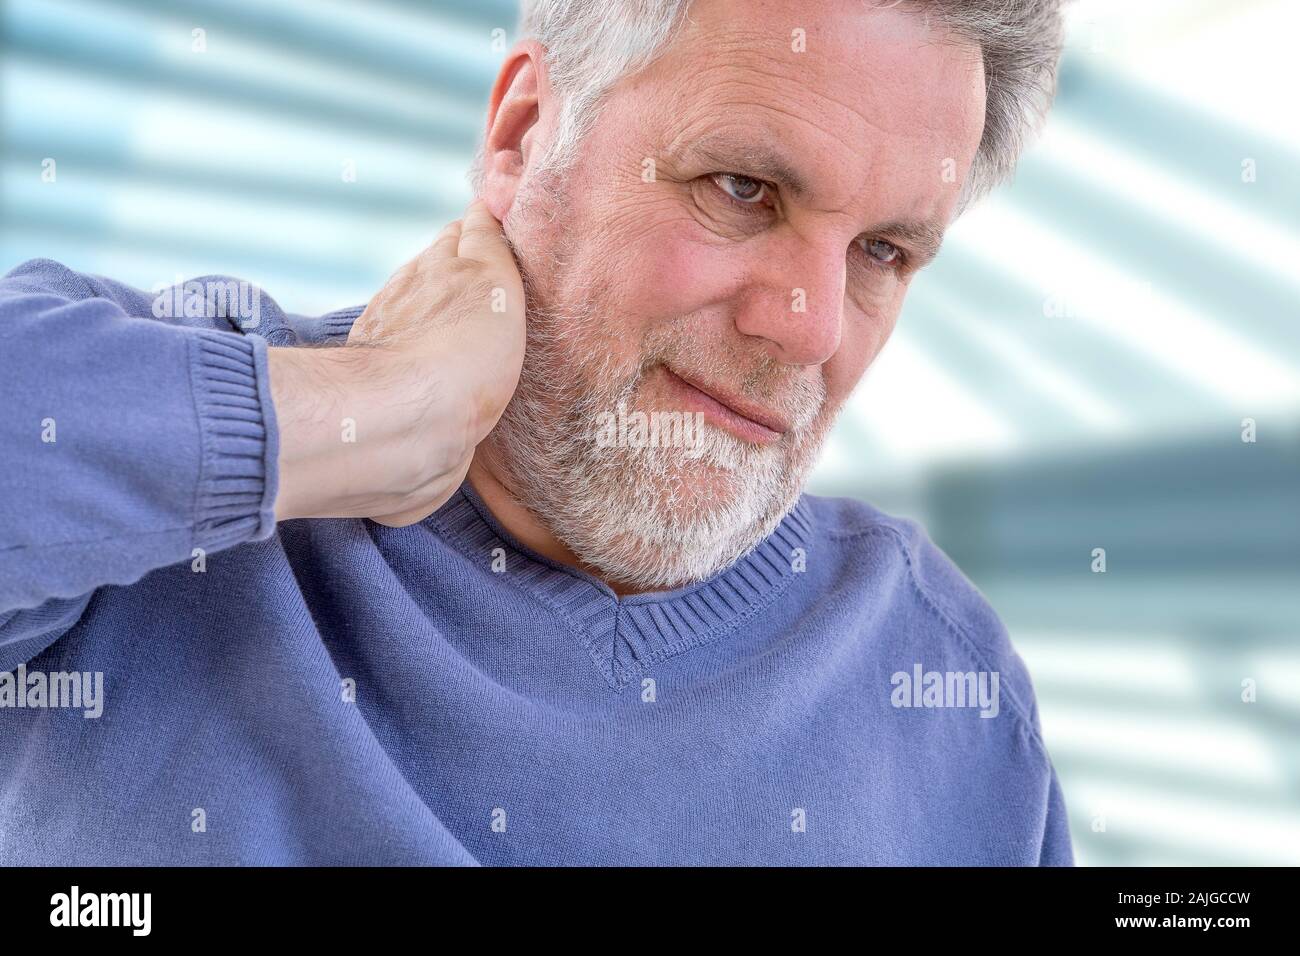 Senior man with a strong pain in the back of his neck front view Stock Photo